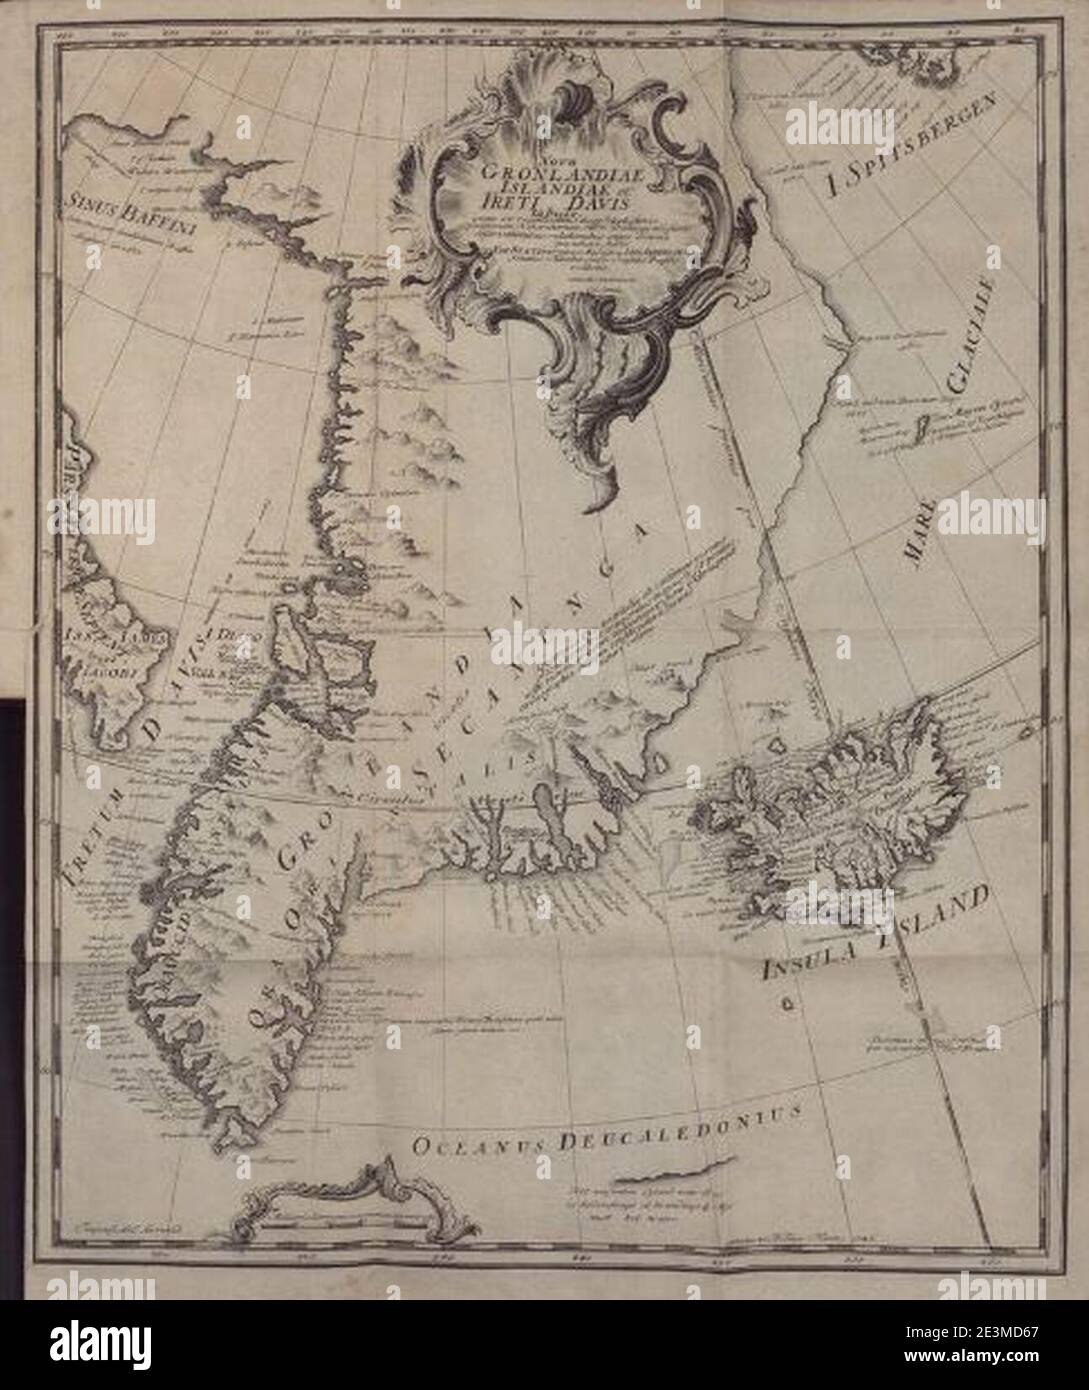 Map of Greenland and Iceland from 1746 book by Johann Anderson. Stock Photo